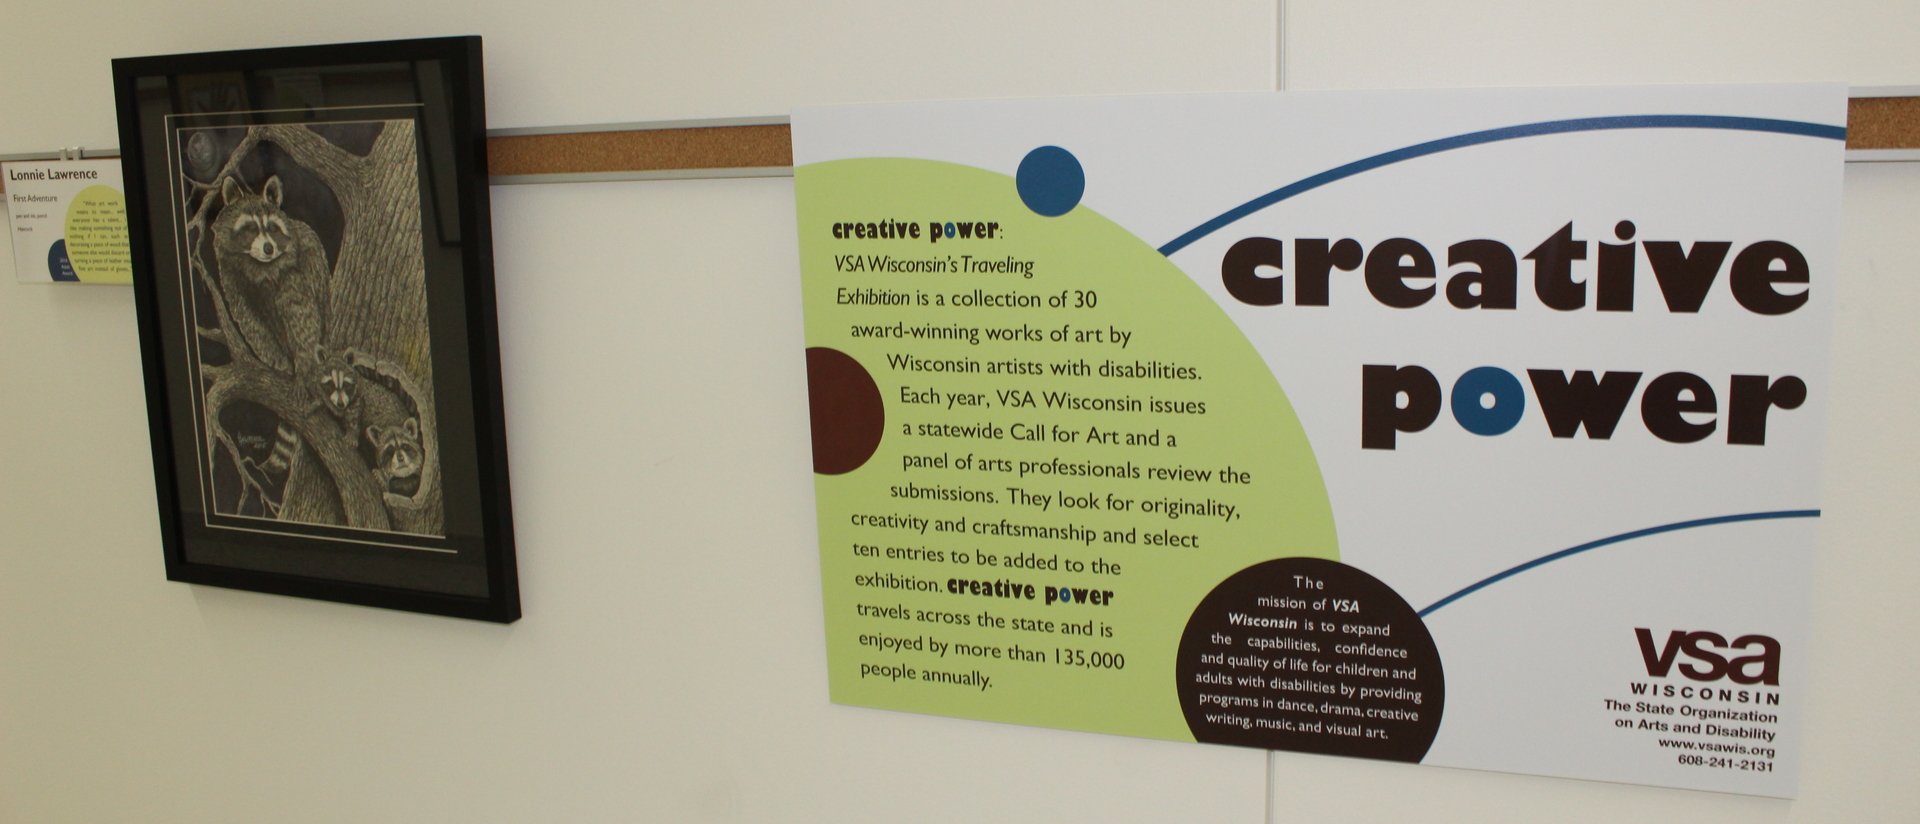 Creative Power: VSA Wisconsin's Traveling Exhibition